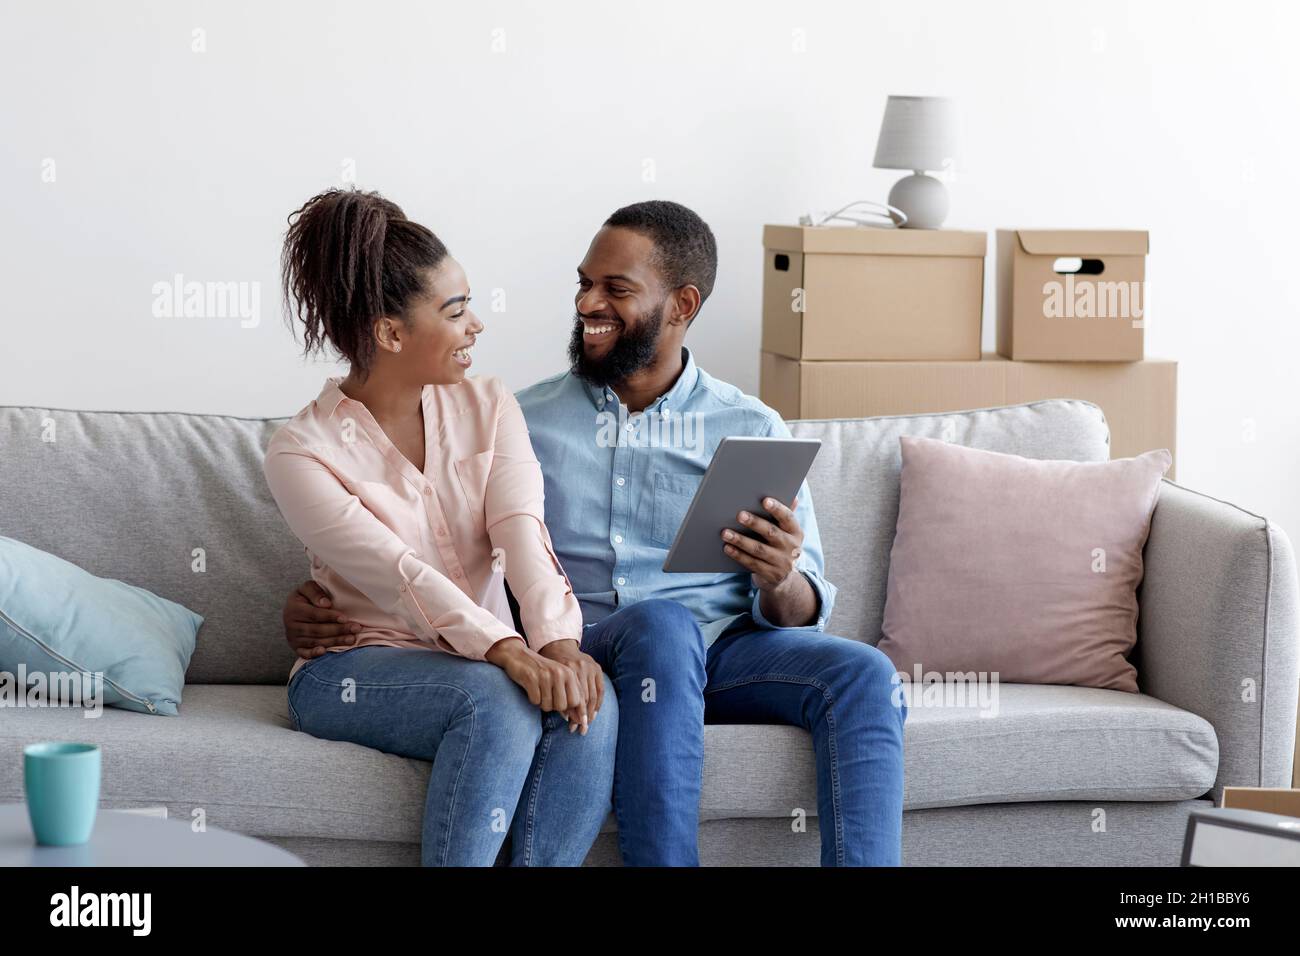 Happy young black male and female relax on couch using tablet for online buying furniture Stock Photo